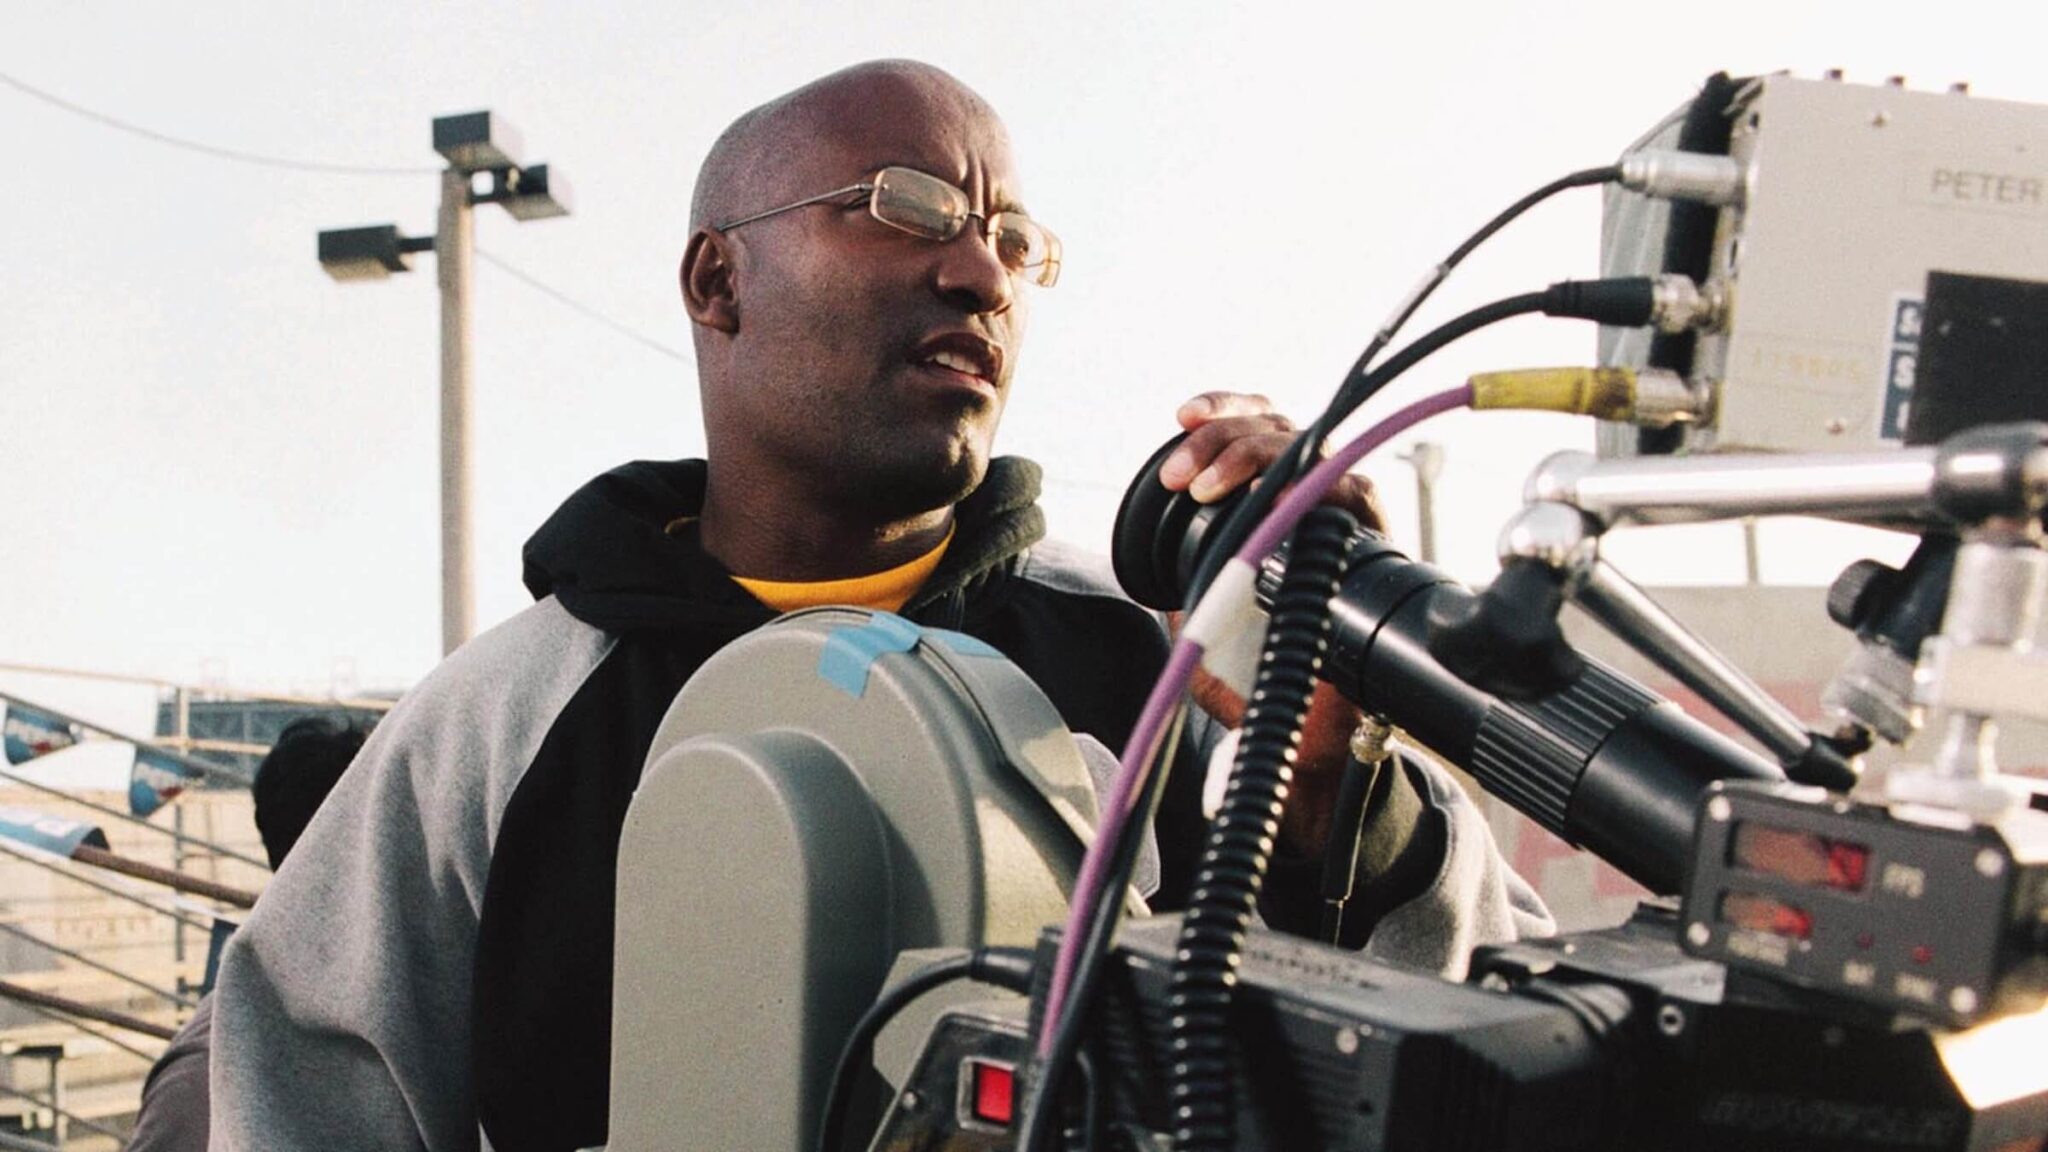 John Singleton directing behind a camera on the set of a film